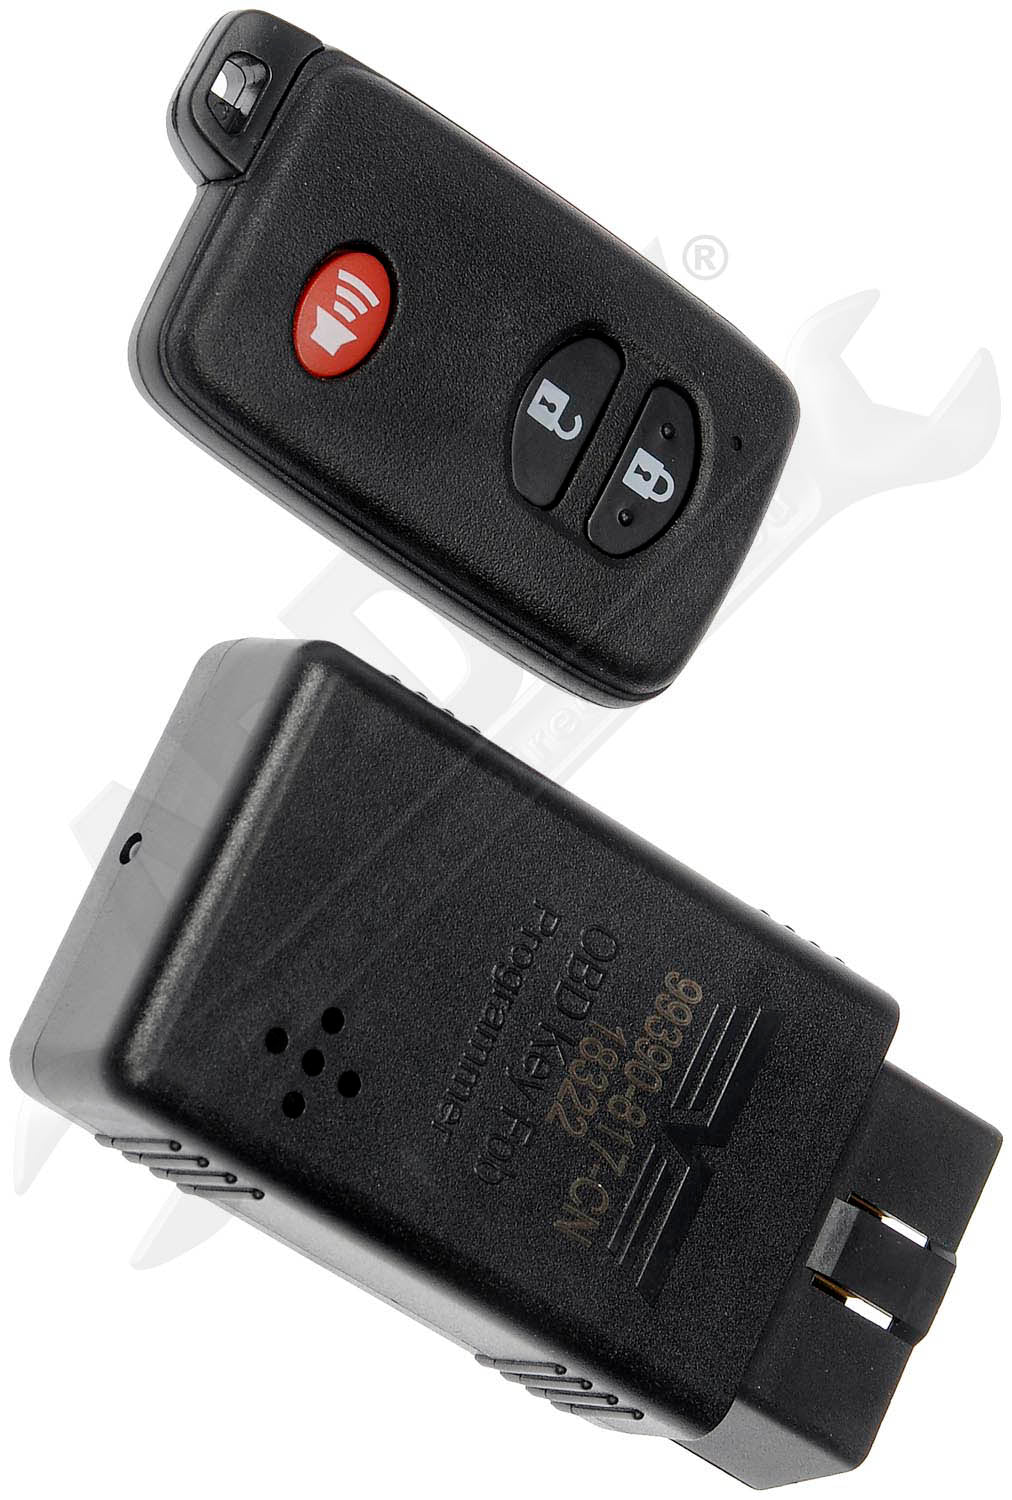 APDTY, APDTY 145064 Keyless Entry Remote 3 Button Replaces 8990406041, 89904-48100